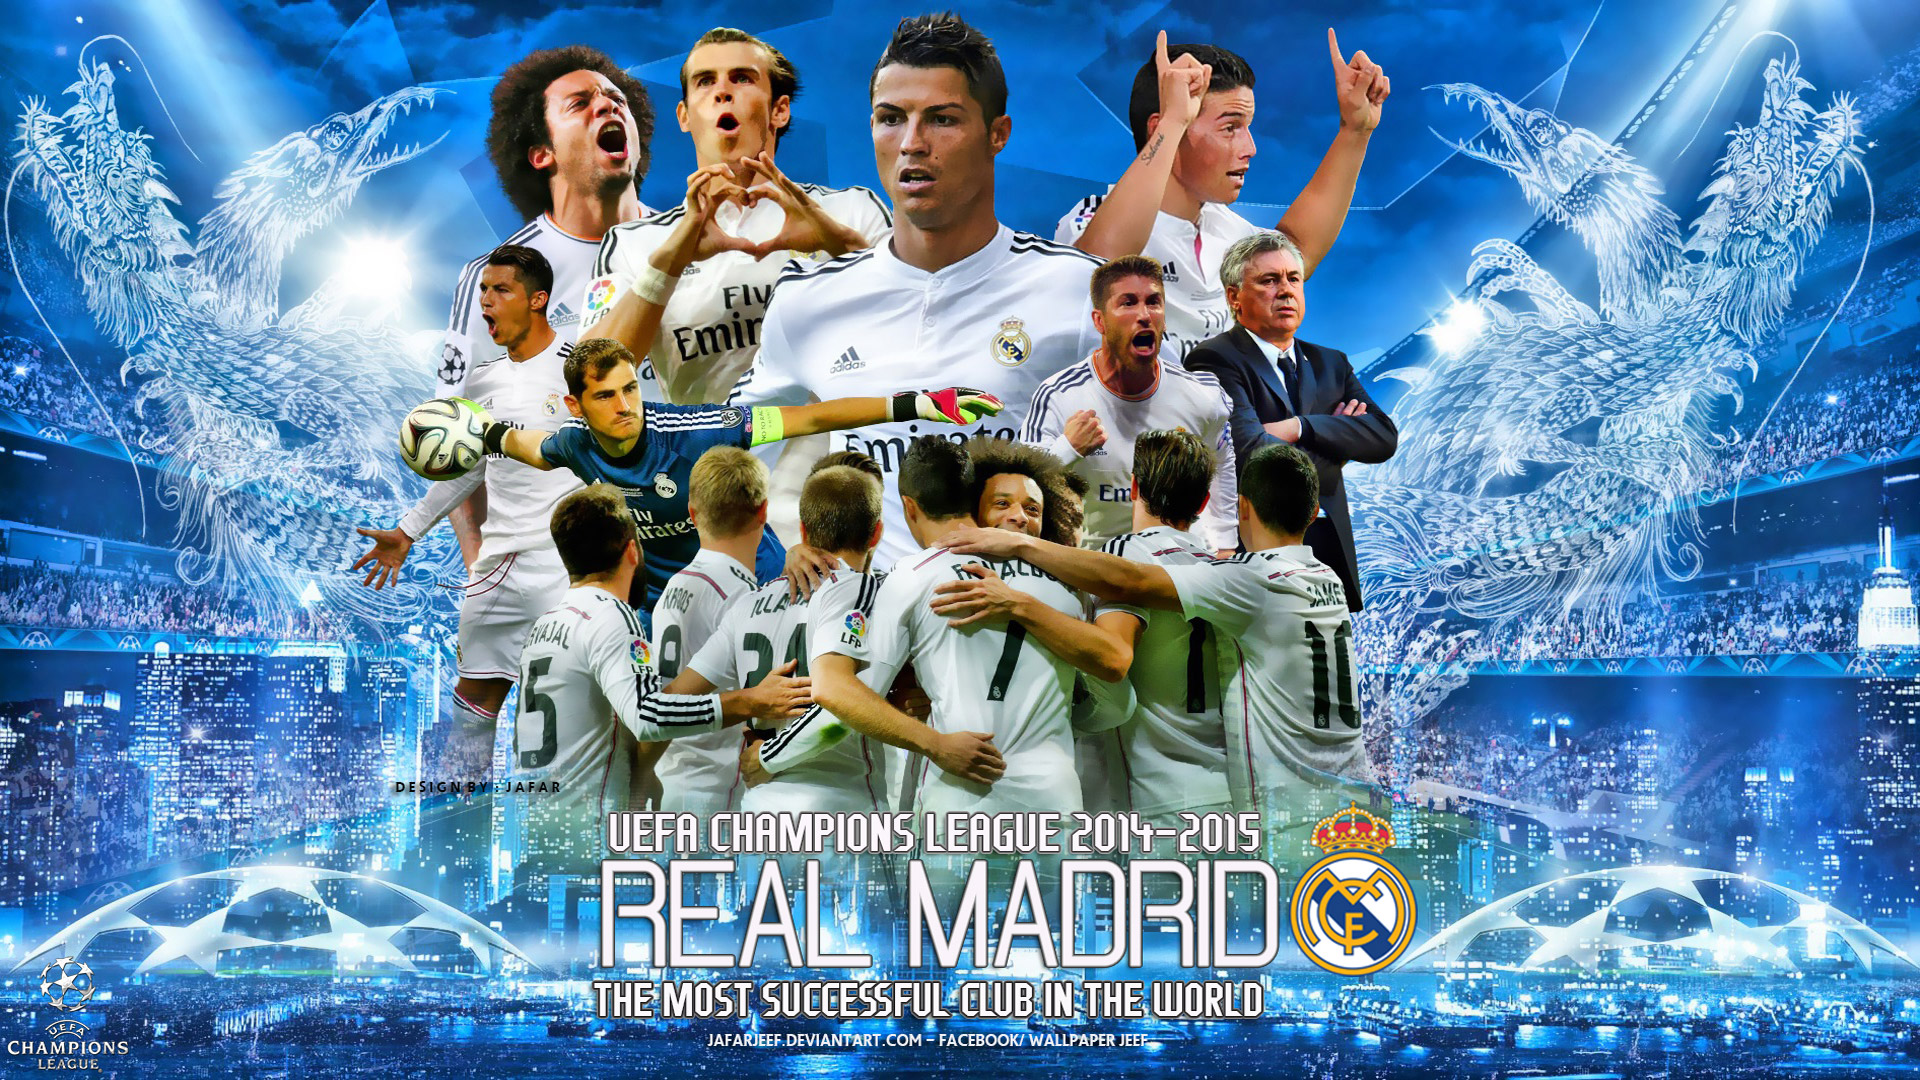 Free Wallpapers   Real Madrid 2015 Champions League wallpaper